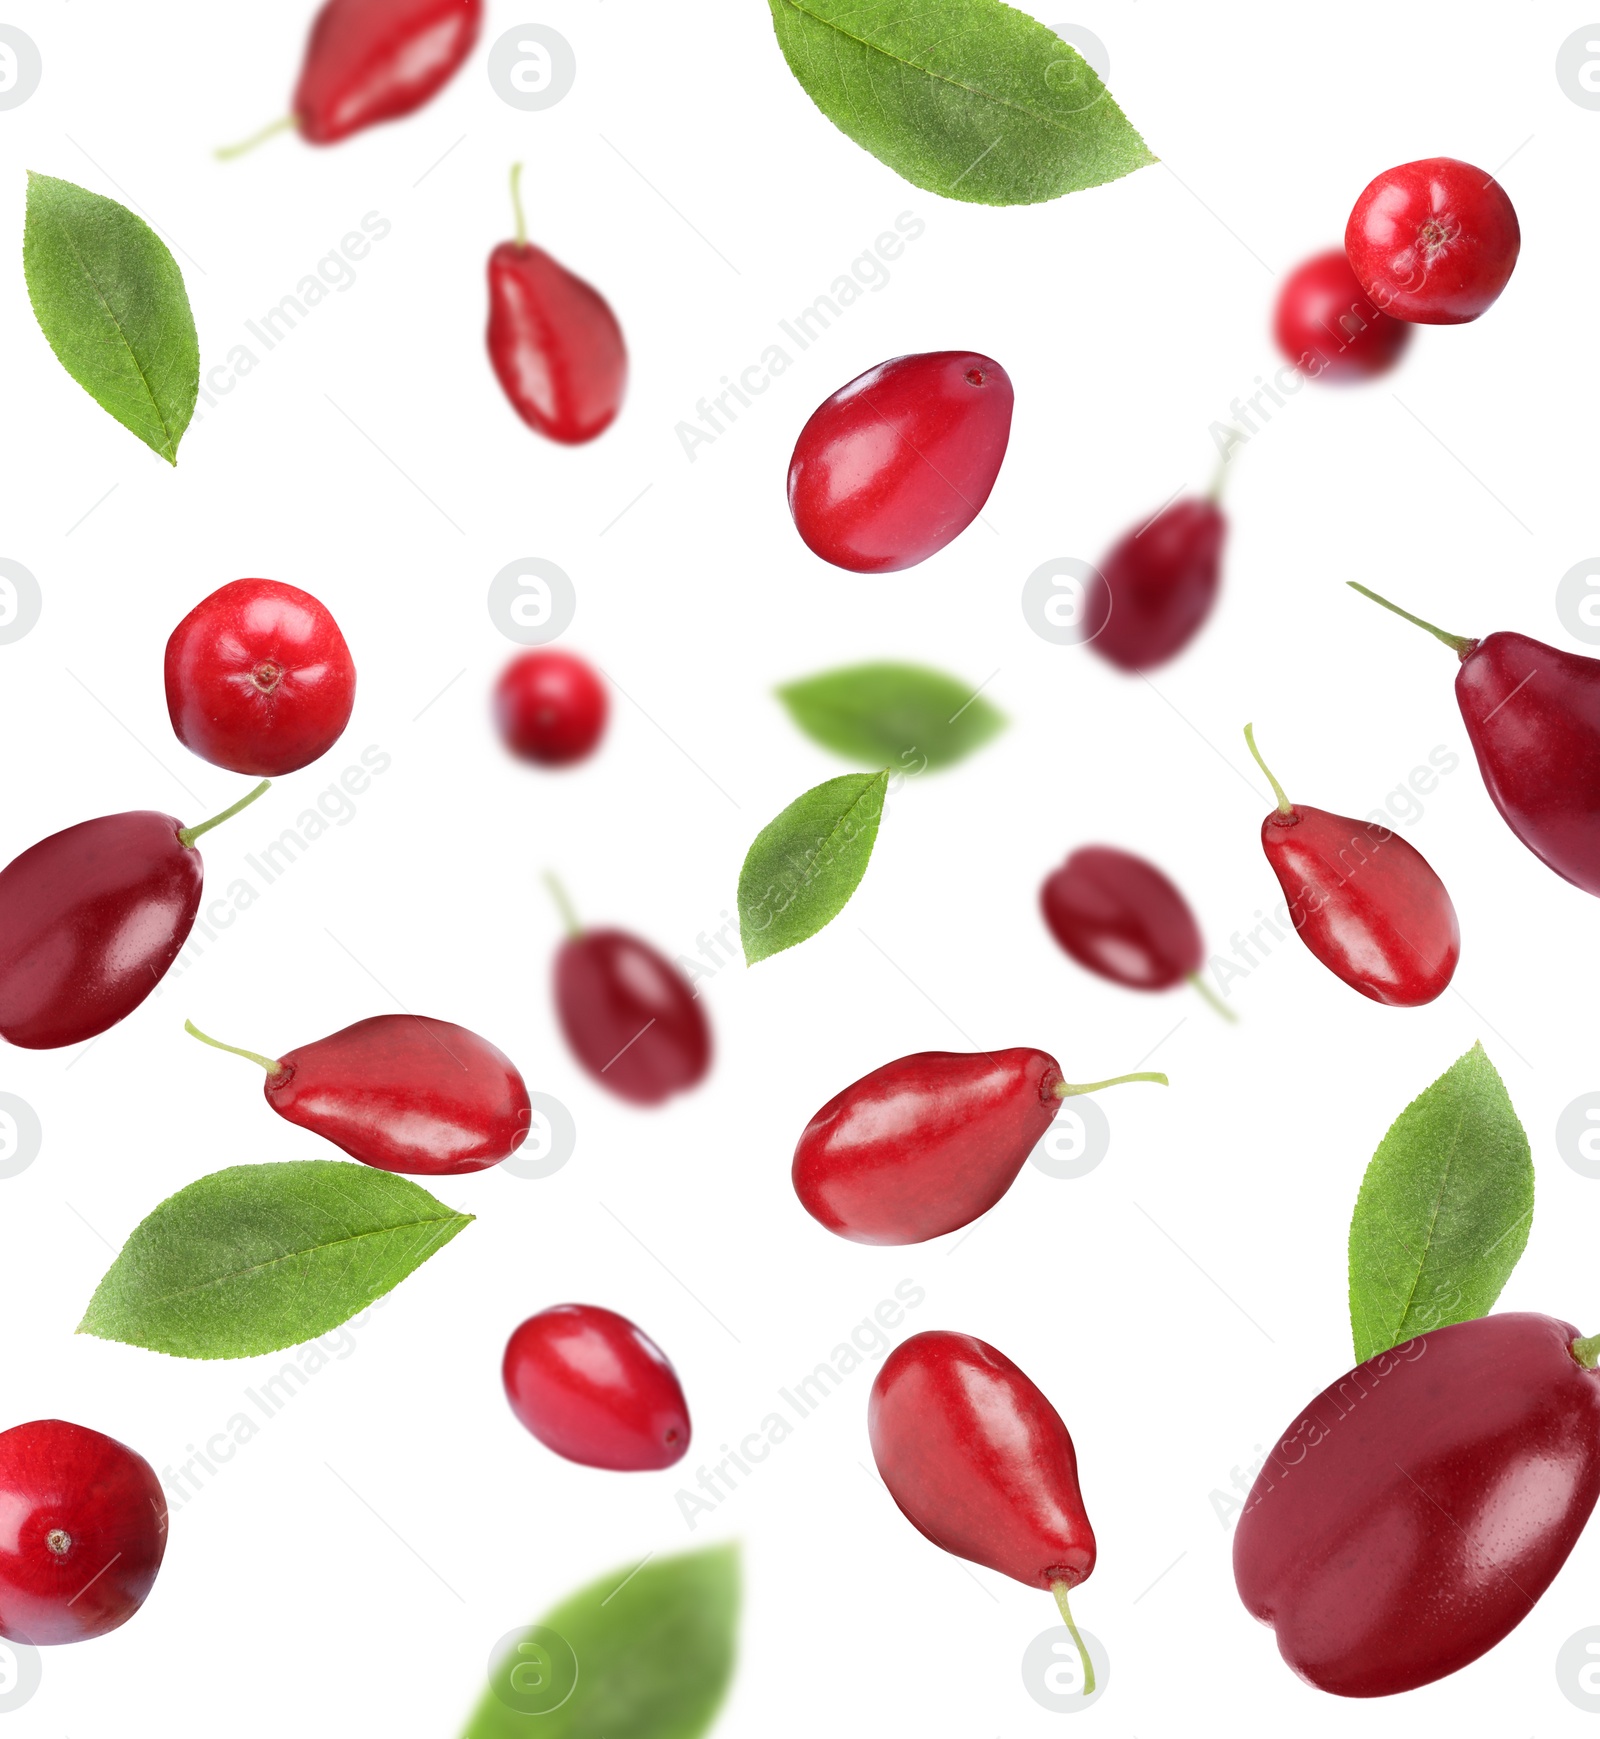 Image of Many fresh dogwood berries and leaves falling on white background